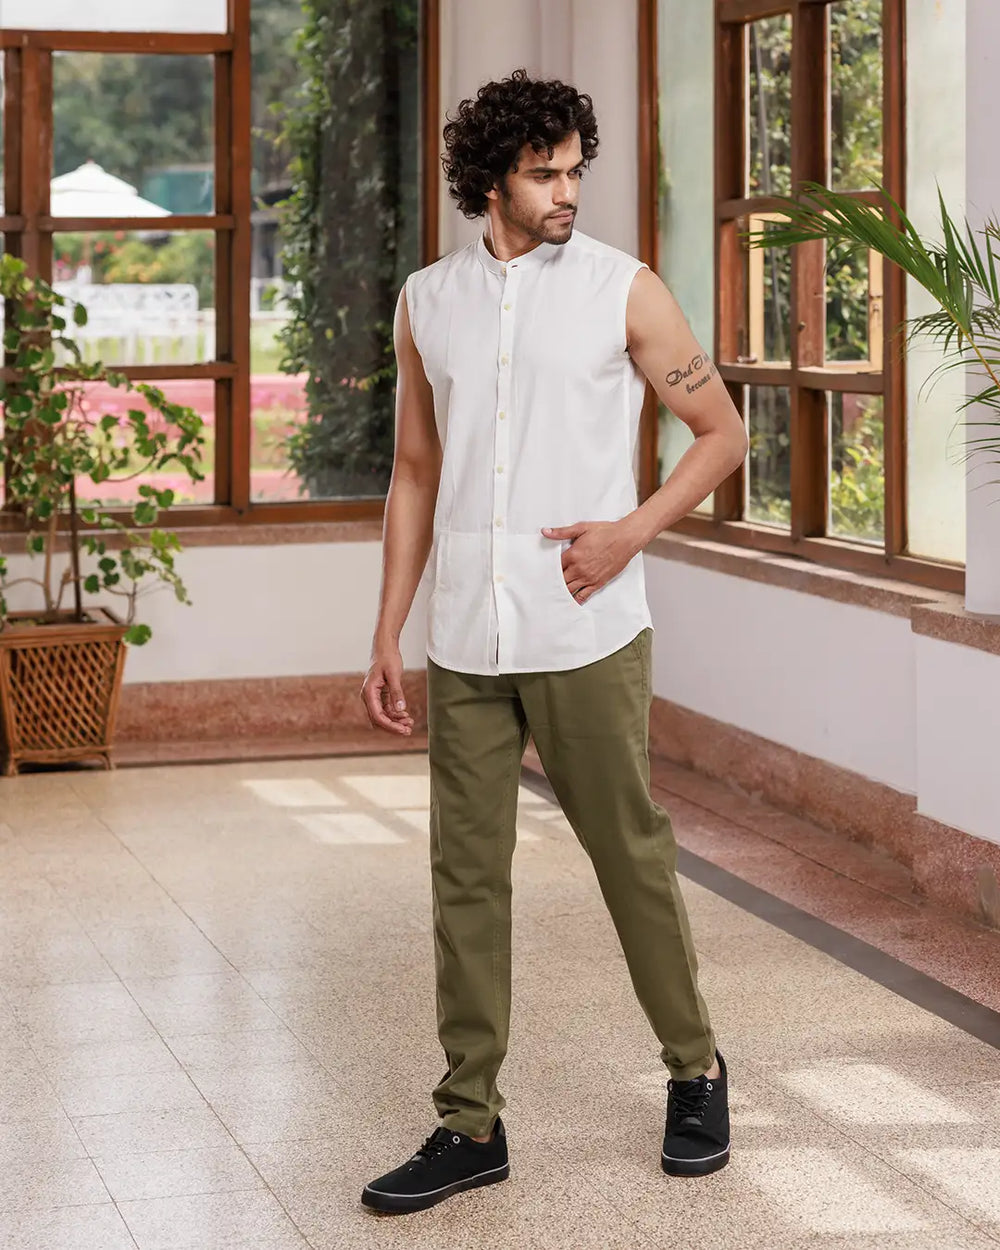 A man with curly hair is standing indoors, wearing a Branco - Sleeveless Shirt made of premium cotton and green pants. He has a tattoo on his left arm and is smiling slightly. Behind him, there are large windows with lush greenery visible outside.